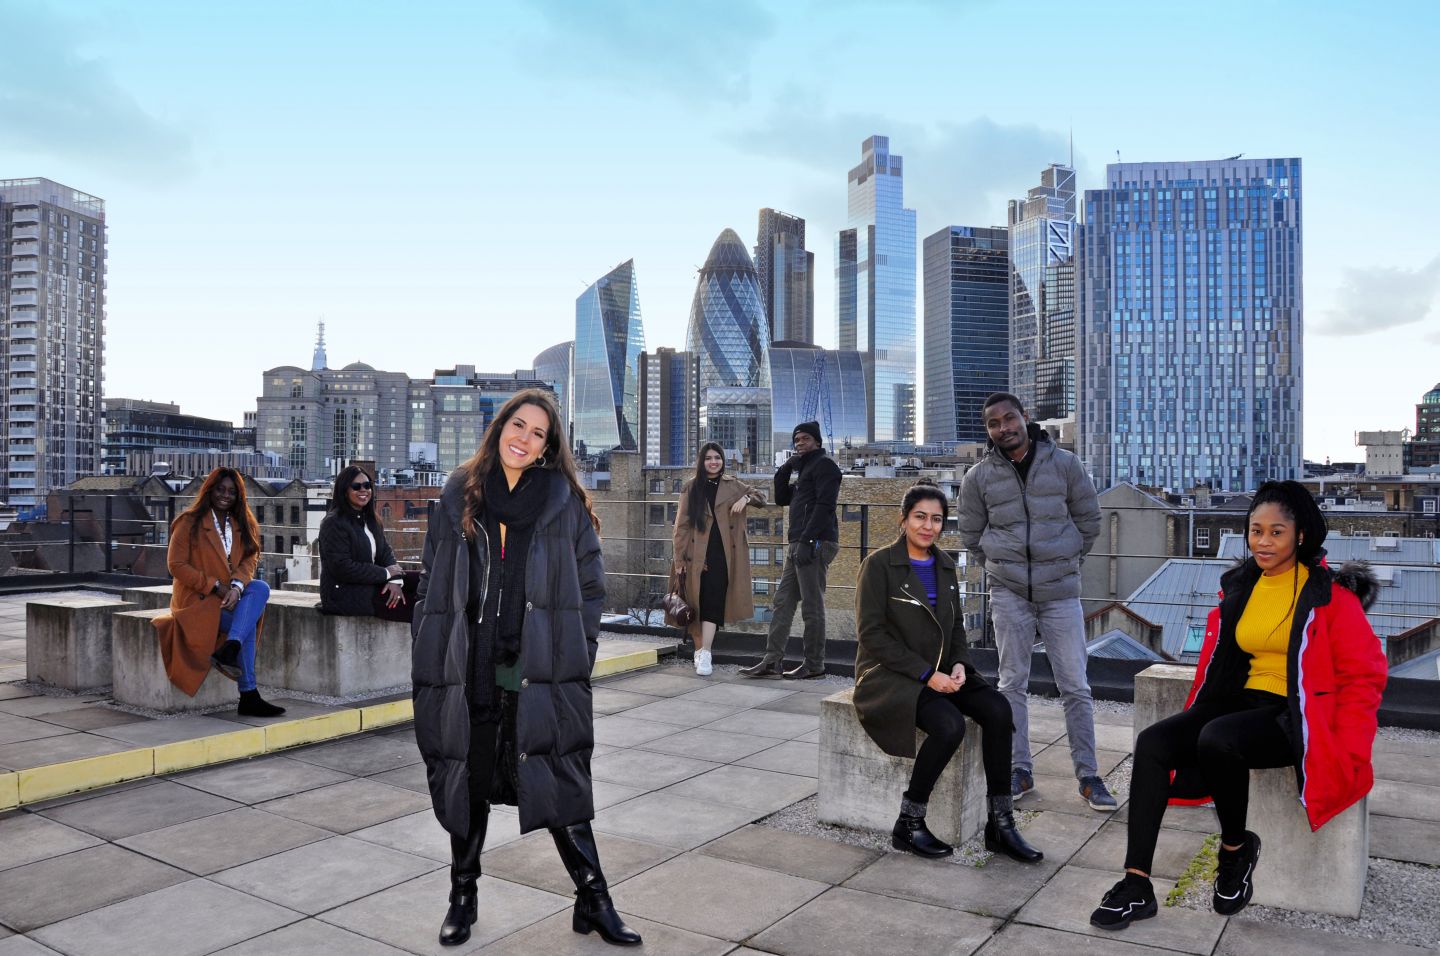 GCU London students on the rooftop of the London campus, in March 2020